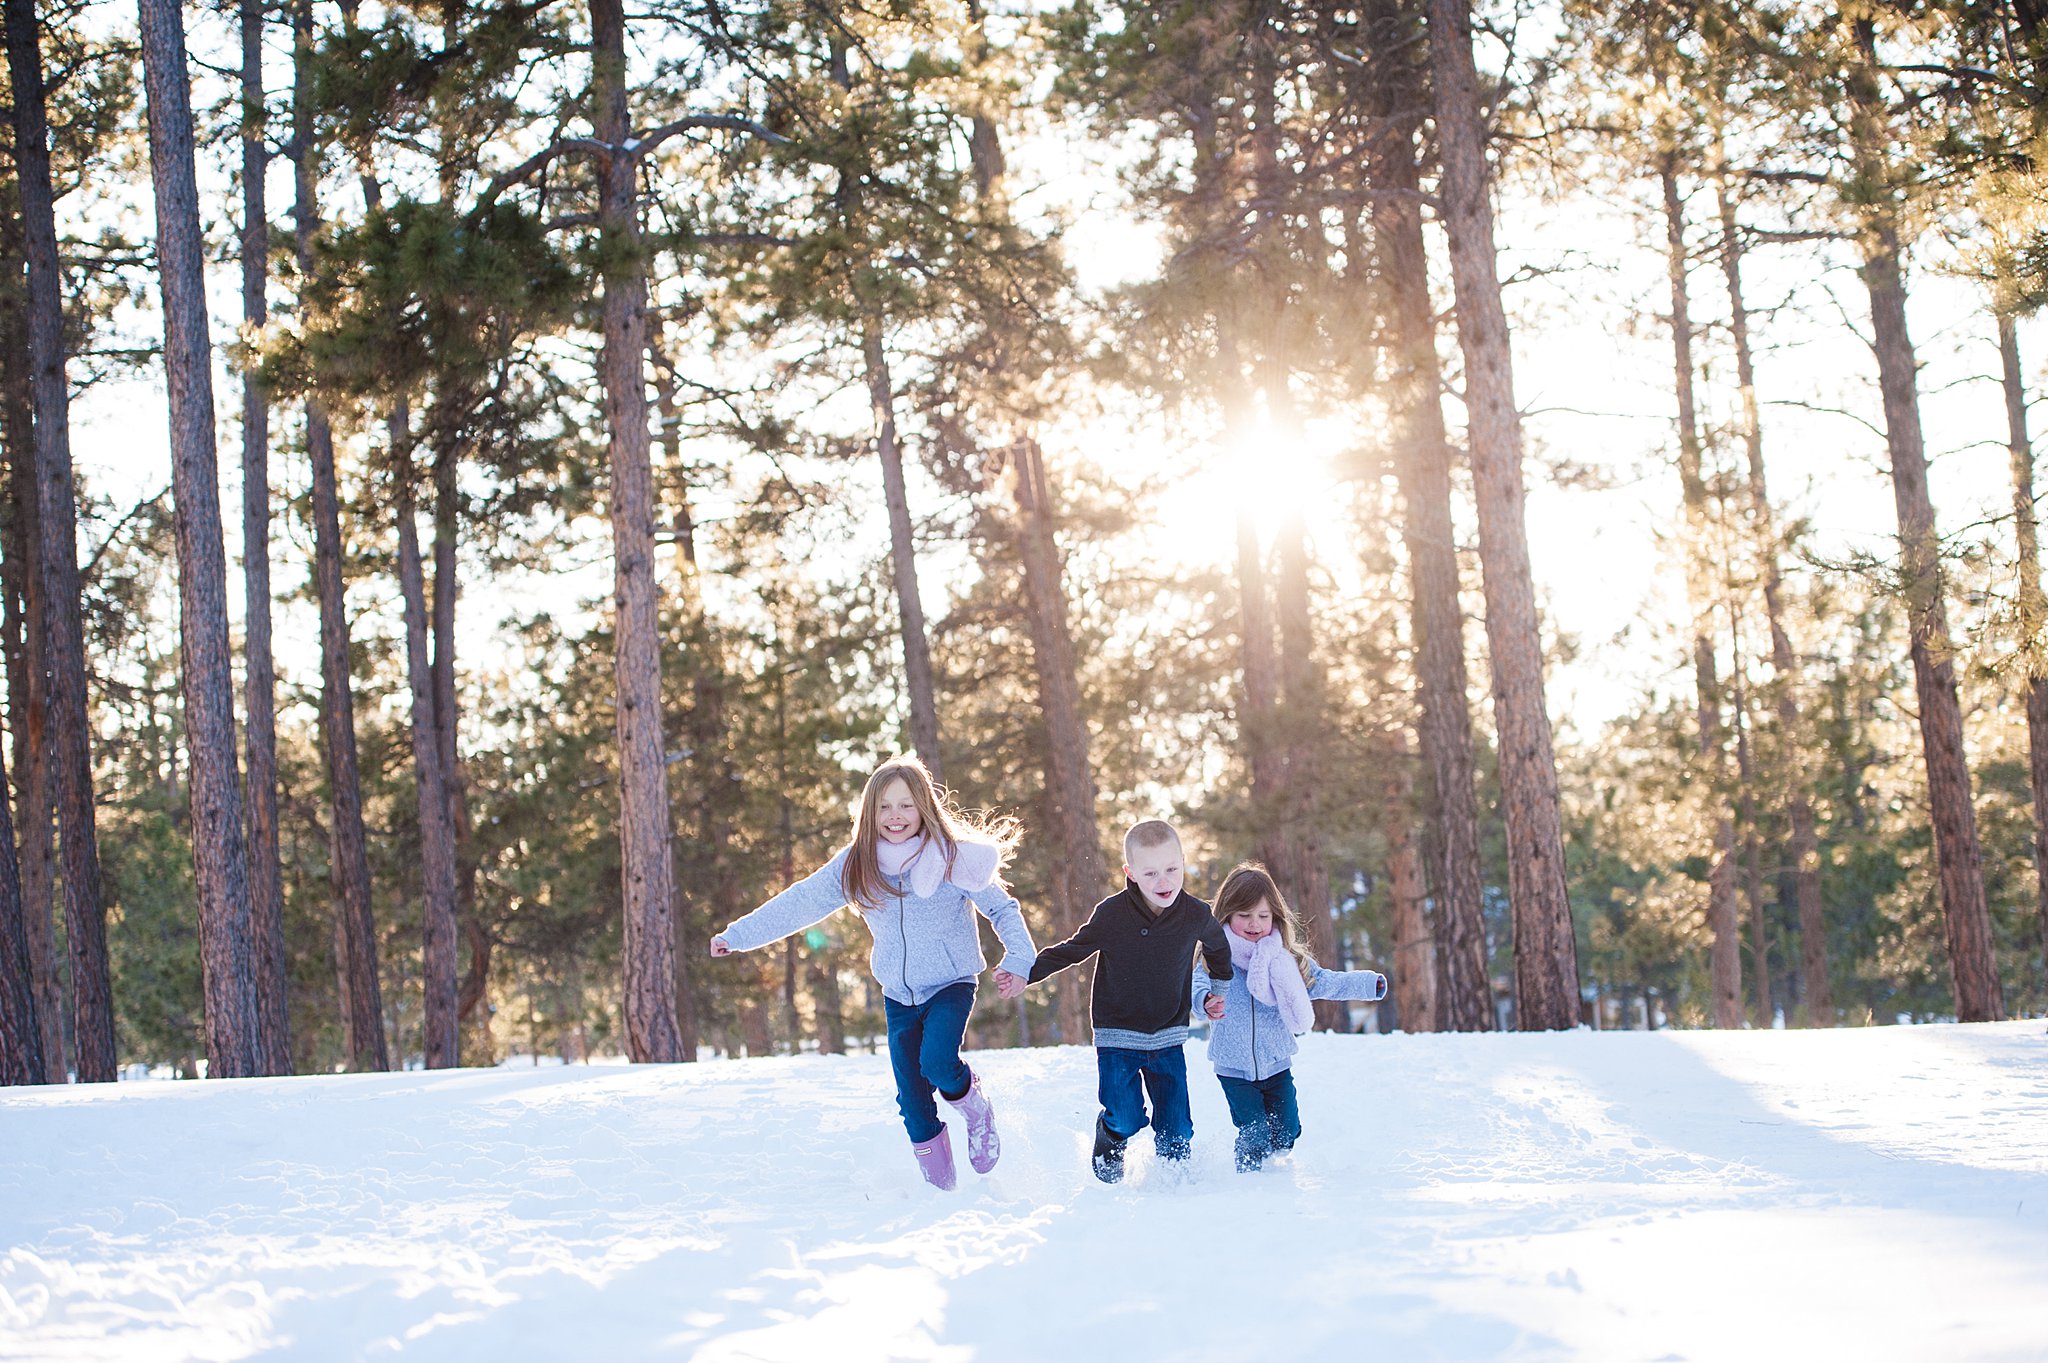 Three young siblings run through the snow in a forest park at sunset during one of the Colorado Springs Family Activities